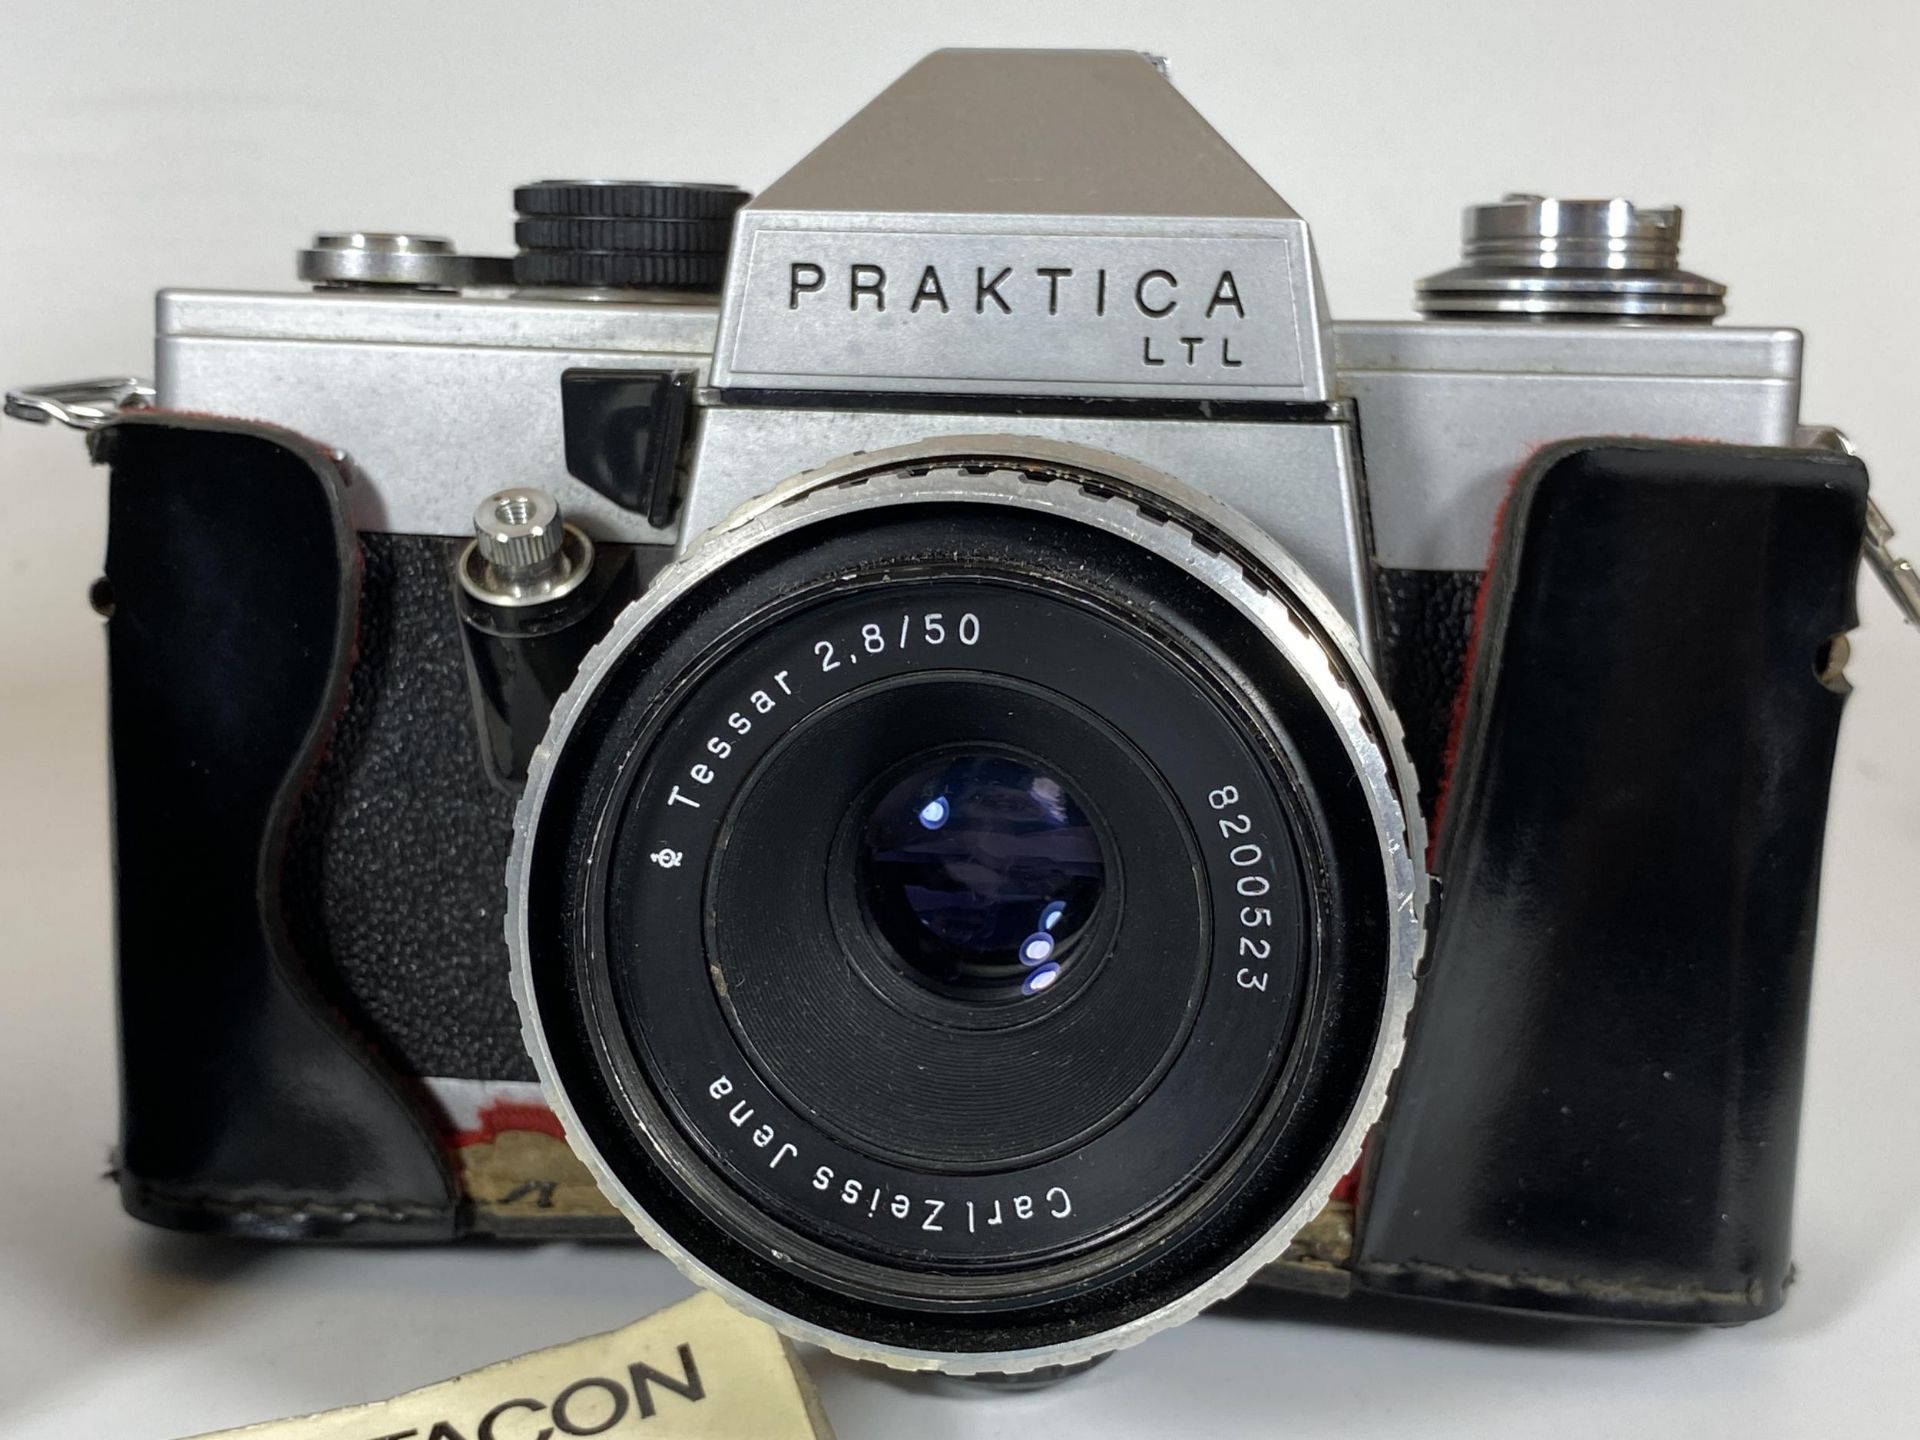 A VINTAGE CASED PRAKTICA LTL CAMERA FITTED WITH CARL ZEISS JENA 2.8/50M LENS AND ORIGINAL BOOKLET - Image 2 of 3